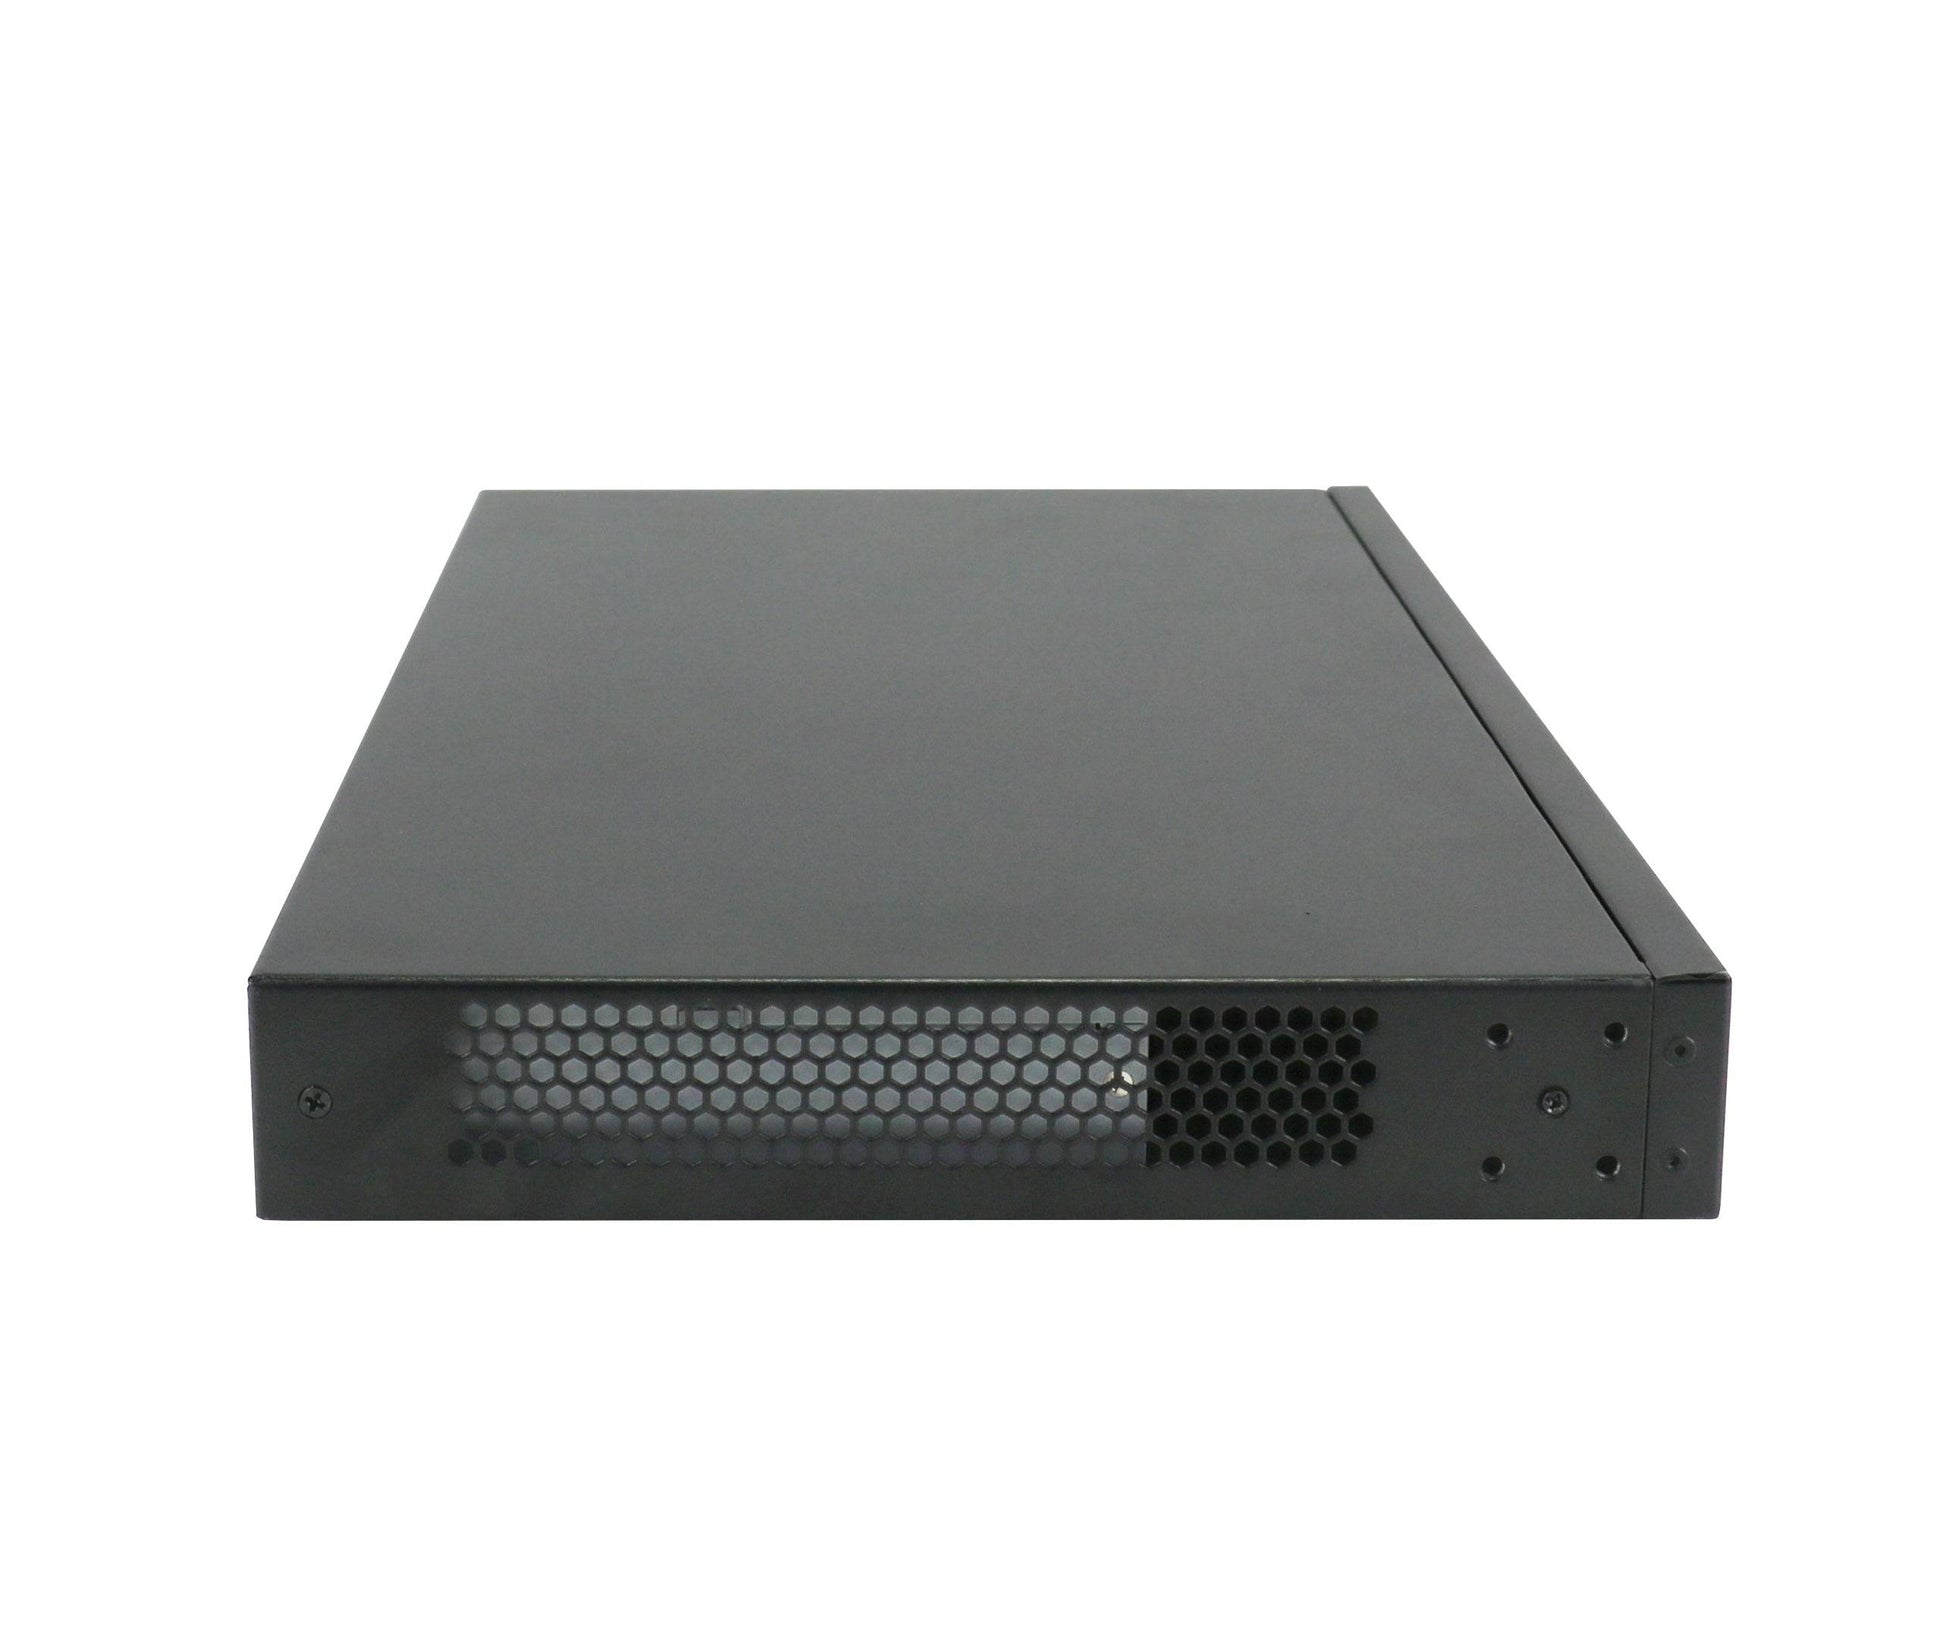 SecPoint Penetrator S9 - 64 IP Concurrent Scan License Vuln Scanning Appliance (1 Years License) - SecPoint